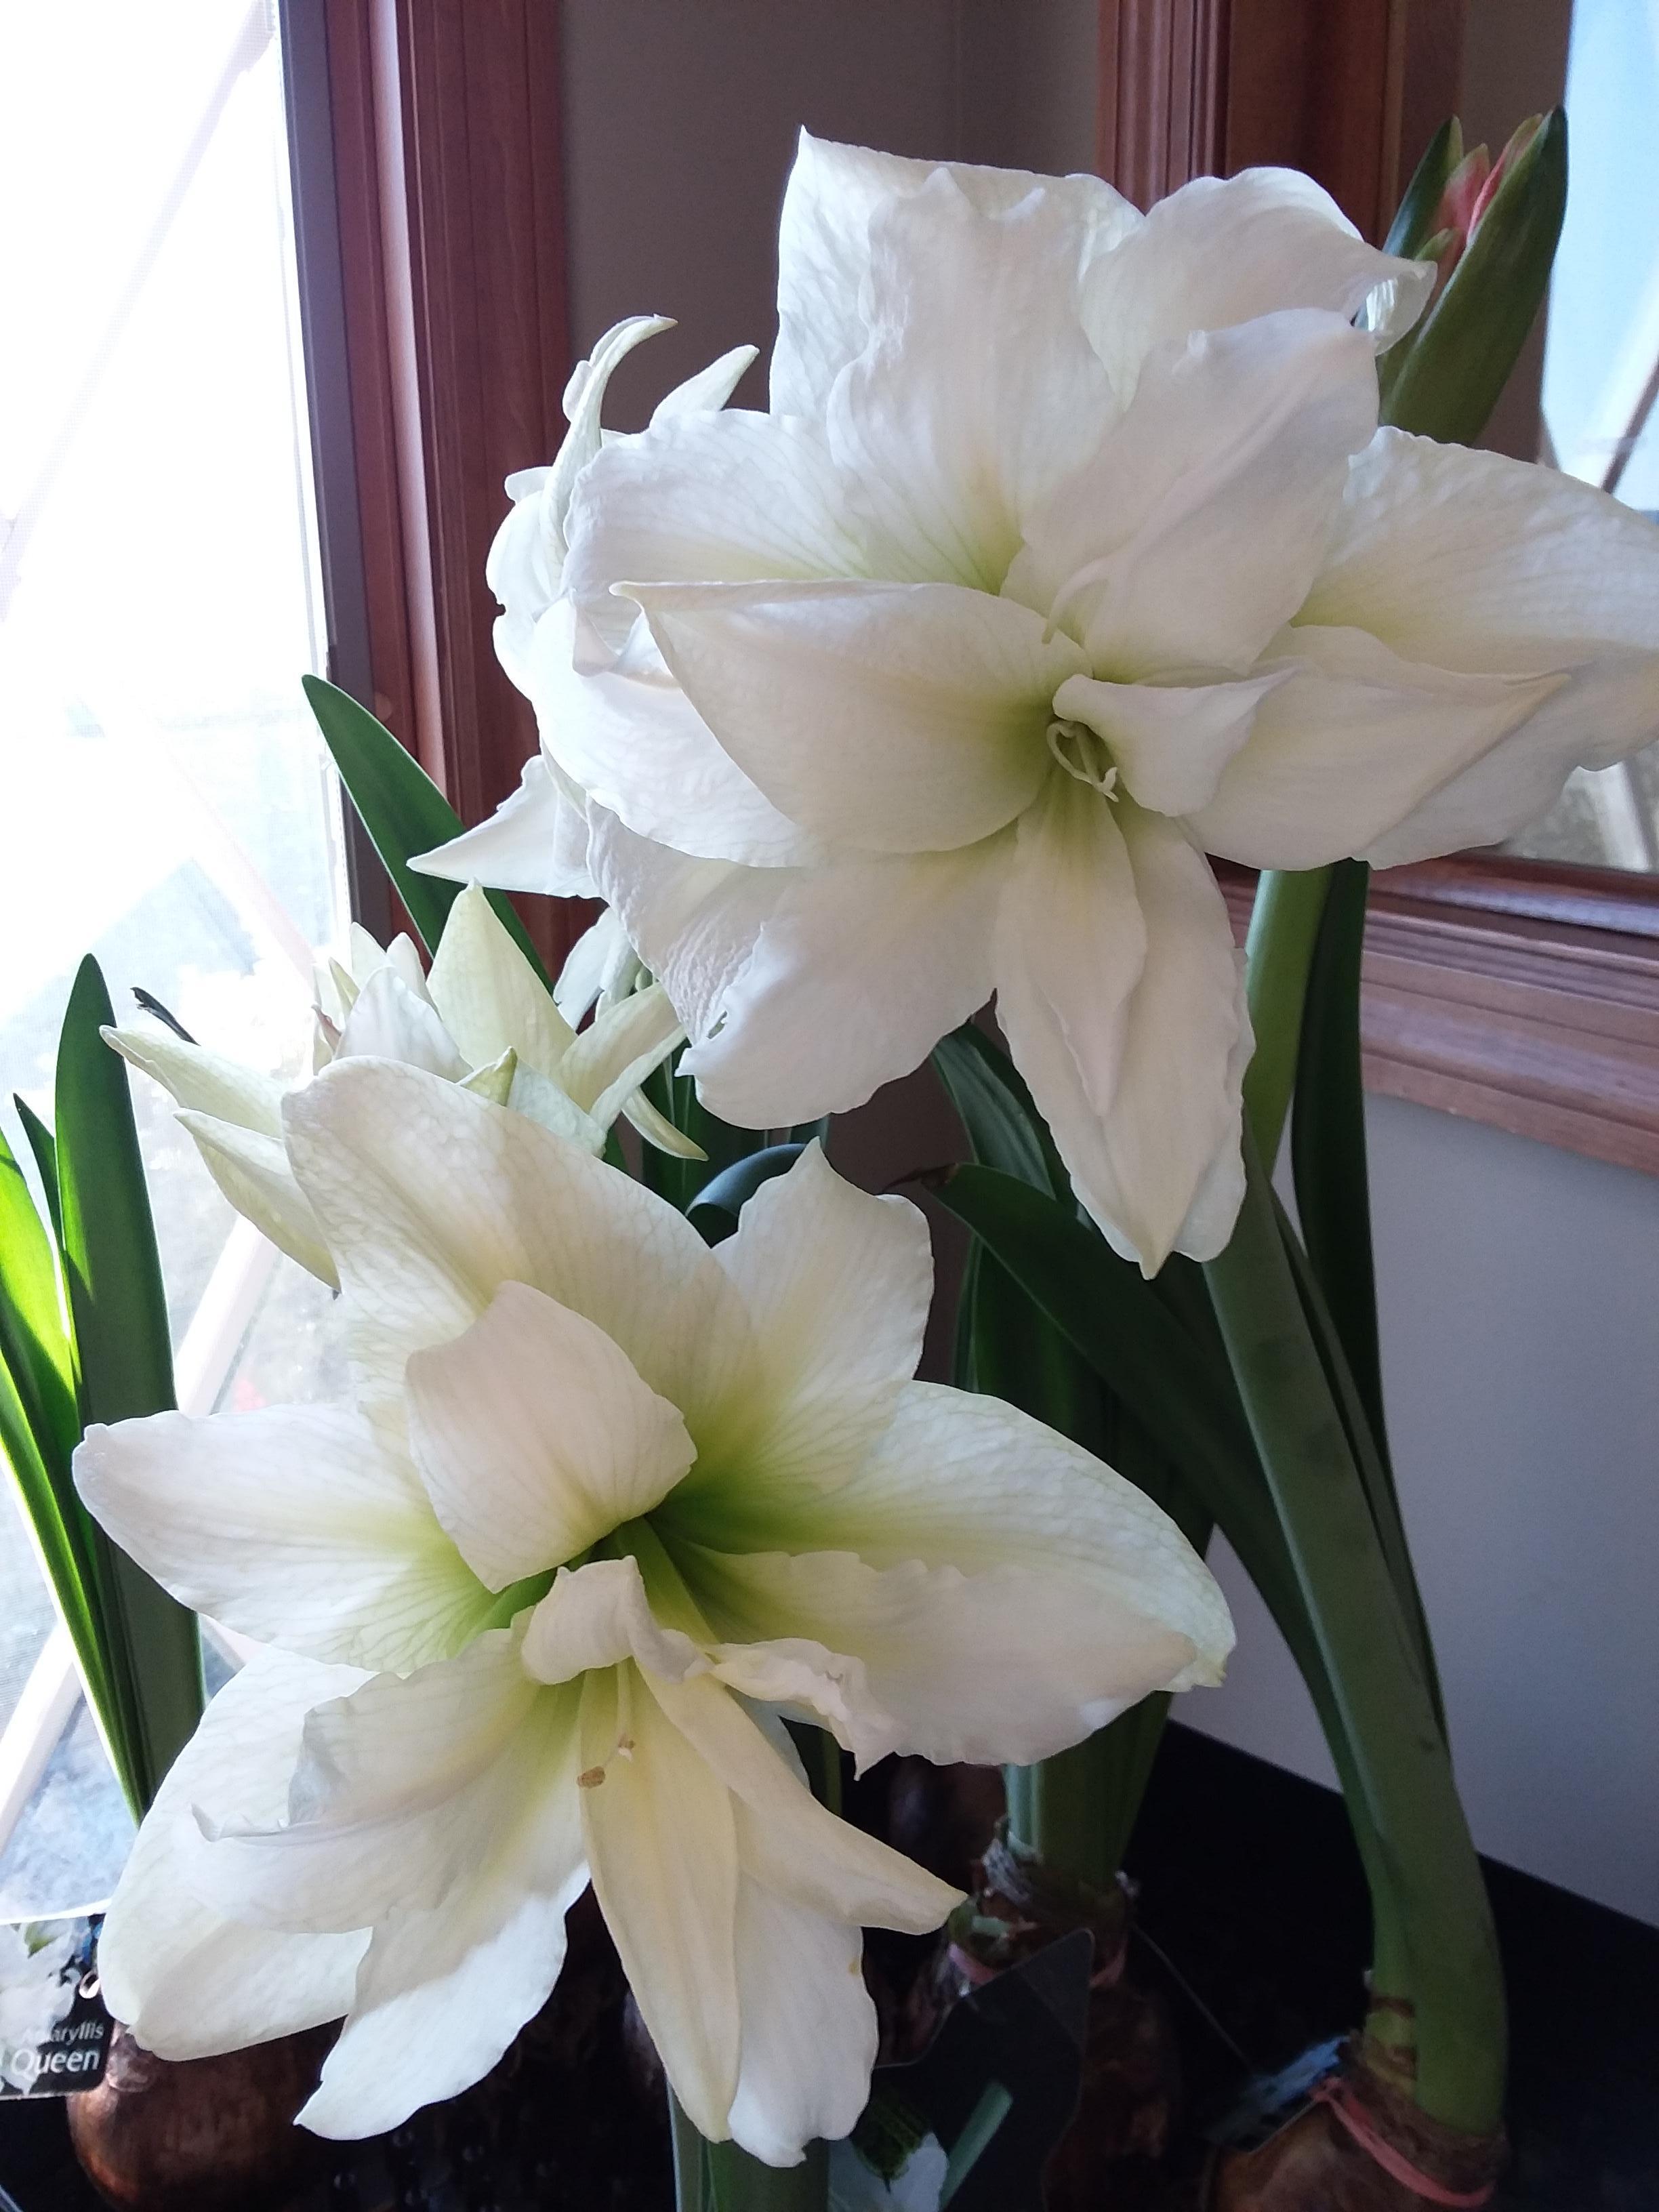 Hippeastrum Holland 'Artic Nymph' - Amaryllis (Shipping begins Fall 2020) from Leo Berbee Bulb Company